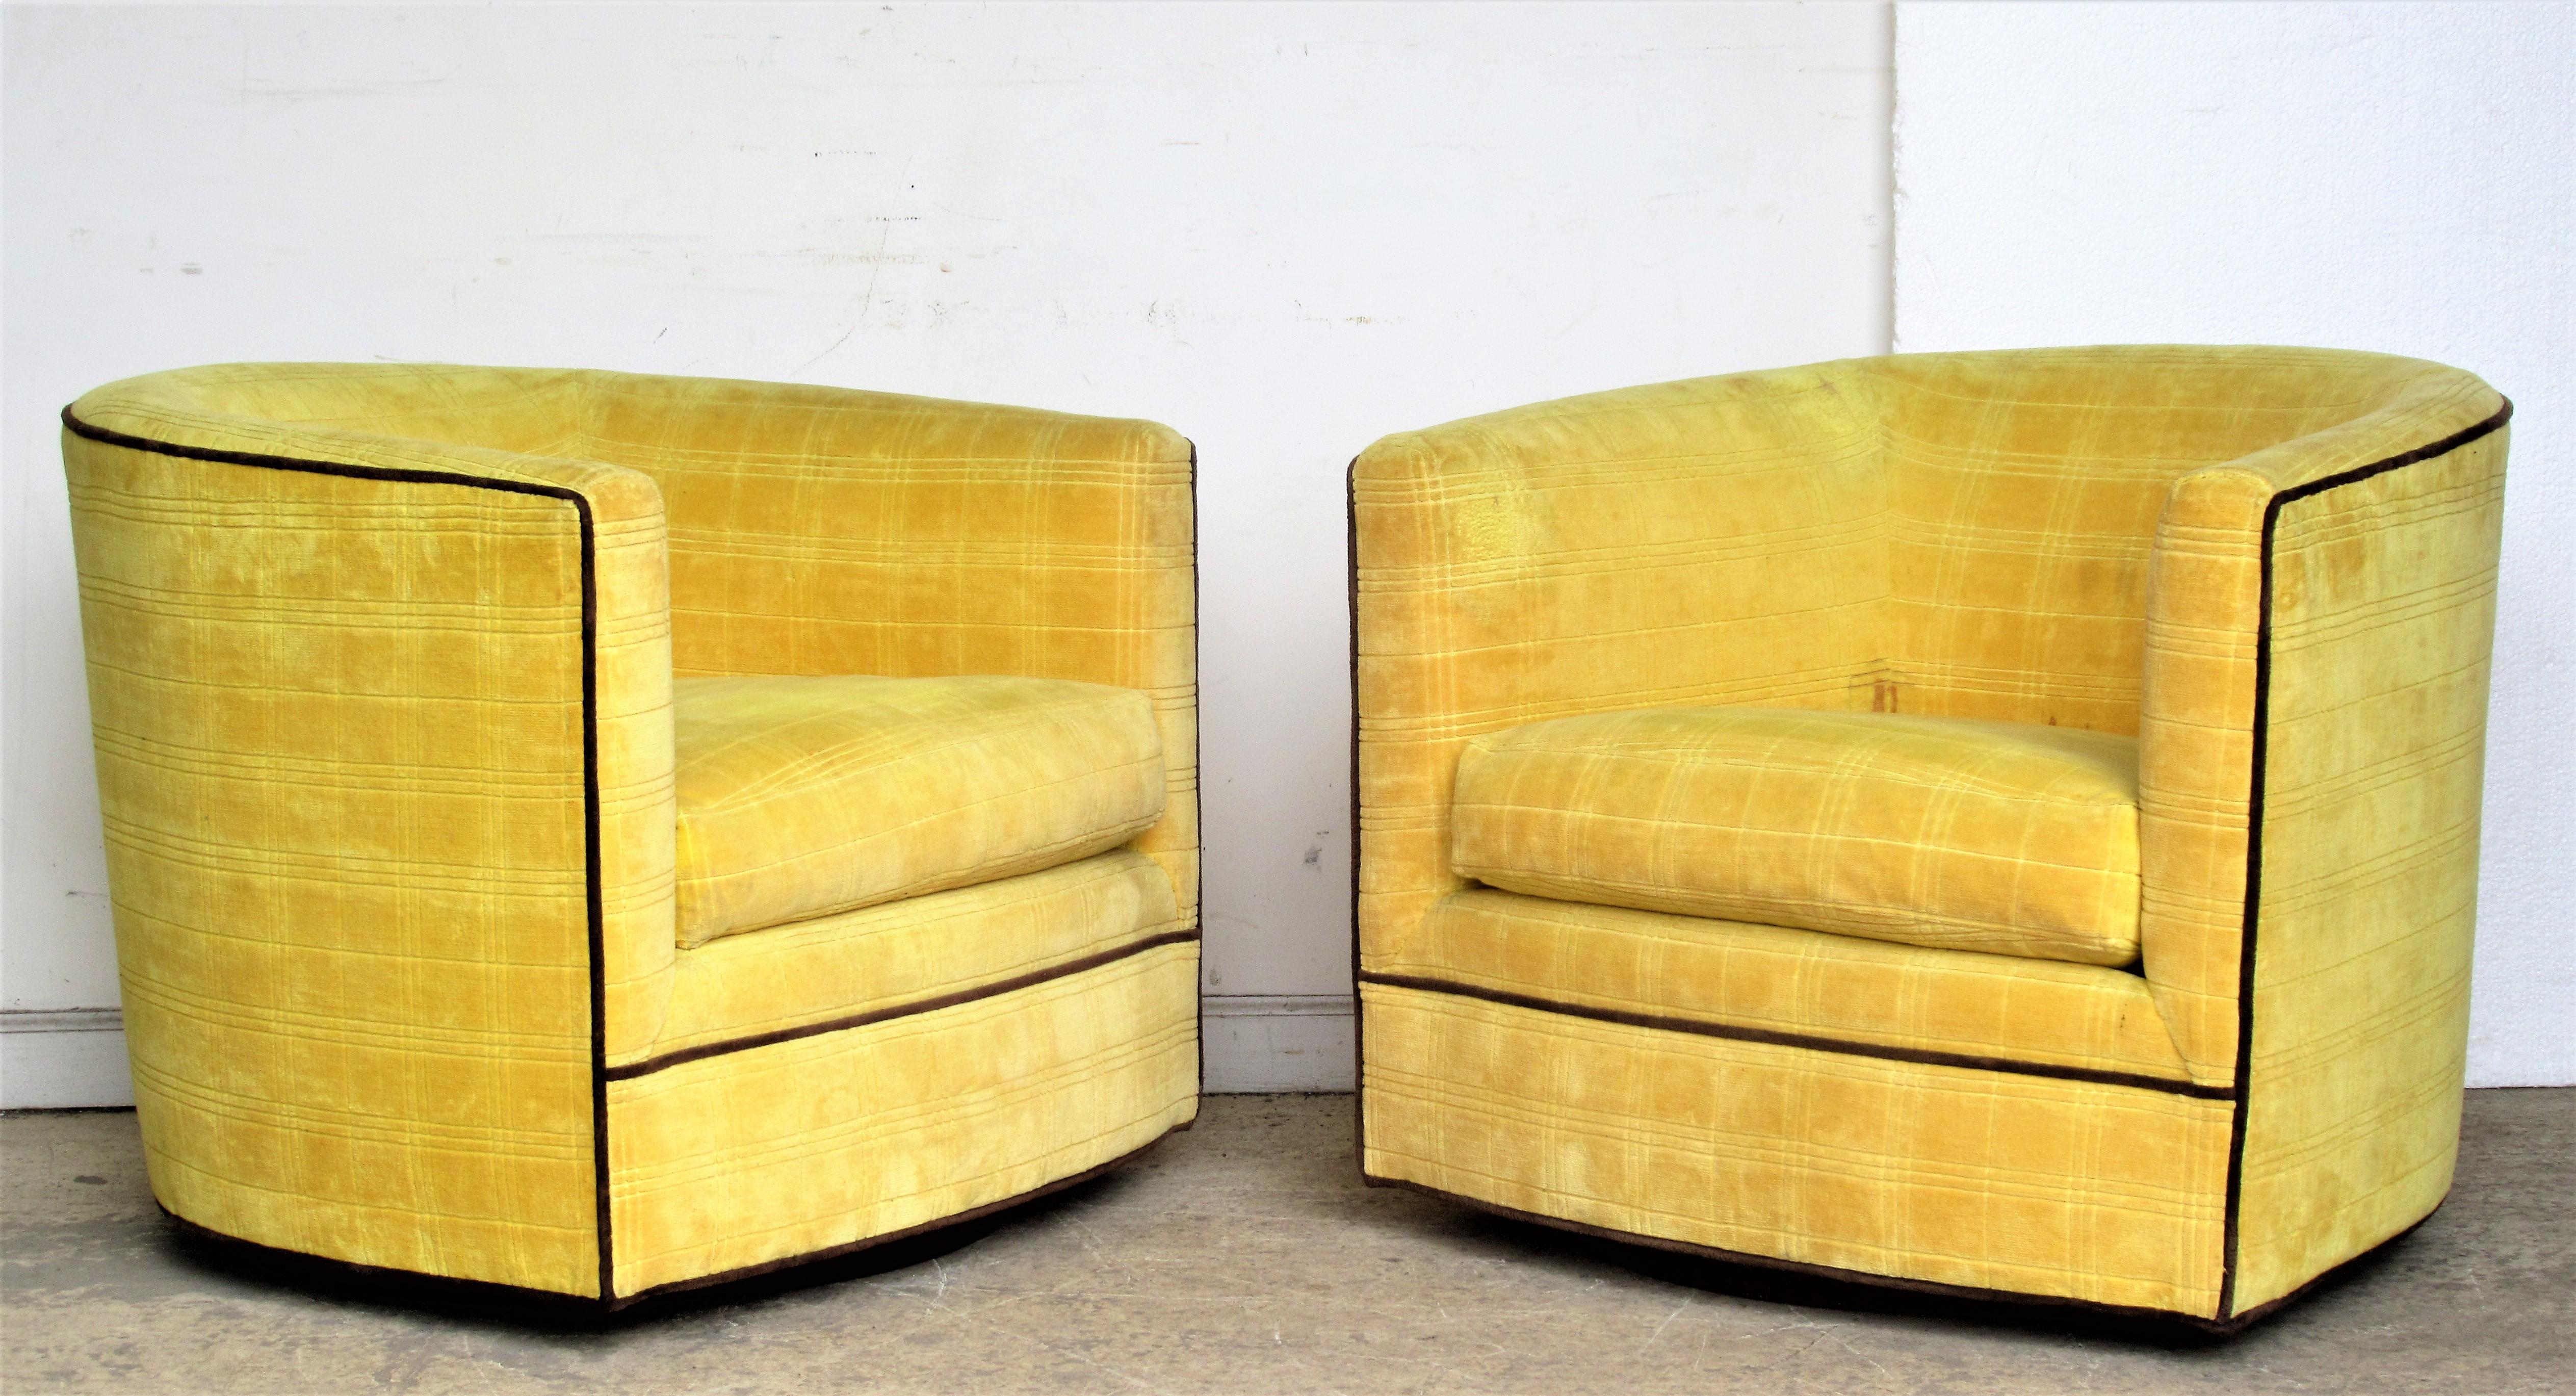 20th Century 1970s Swivel Barrel Chairs in the style of Milo Baughman